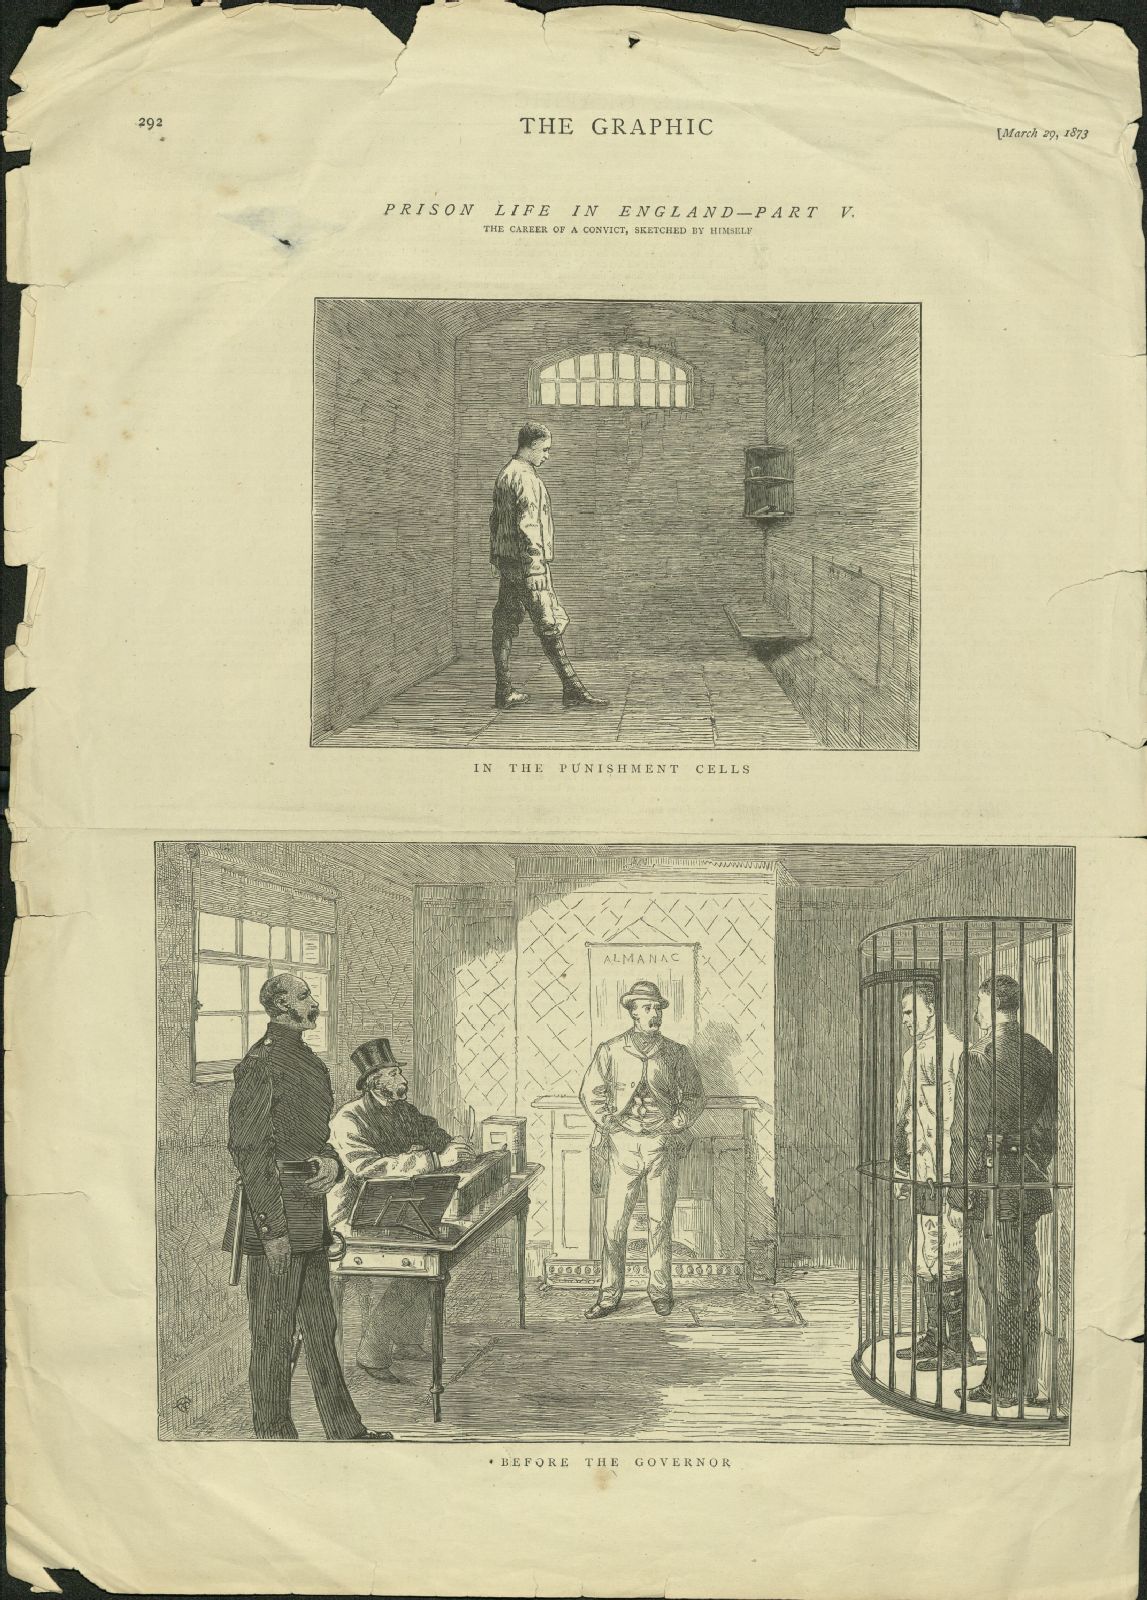 Engravings of a convict in prison